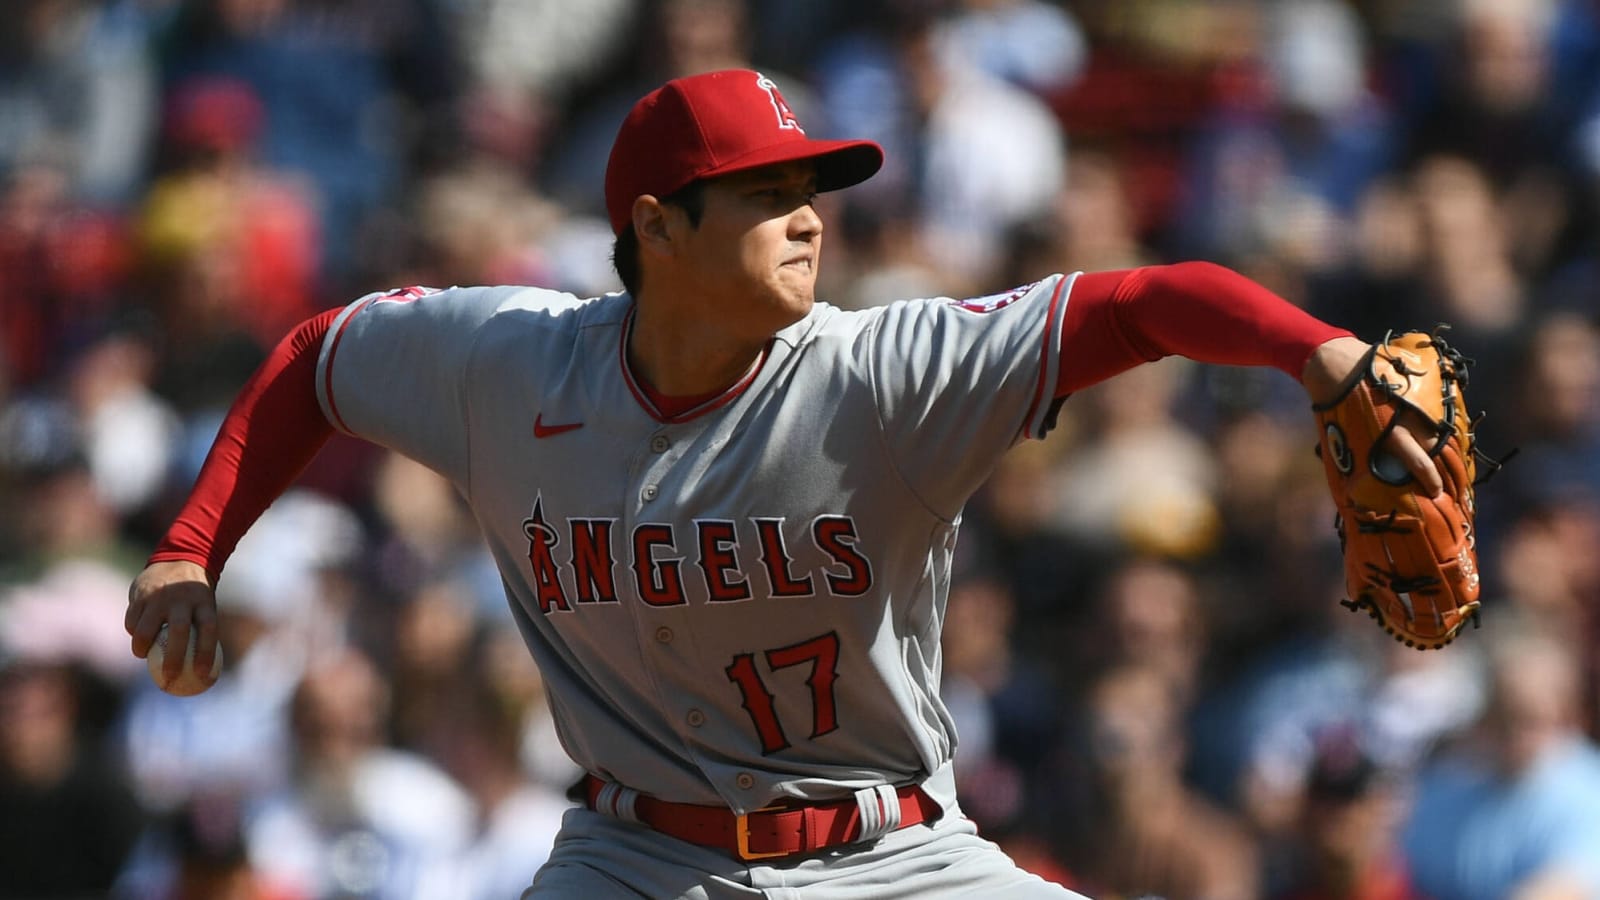 Ohtani strikes out 11, records two hits in 8-0 win over Red Sox